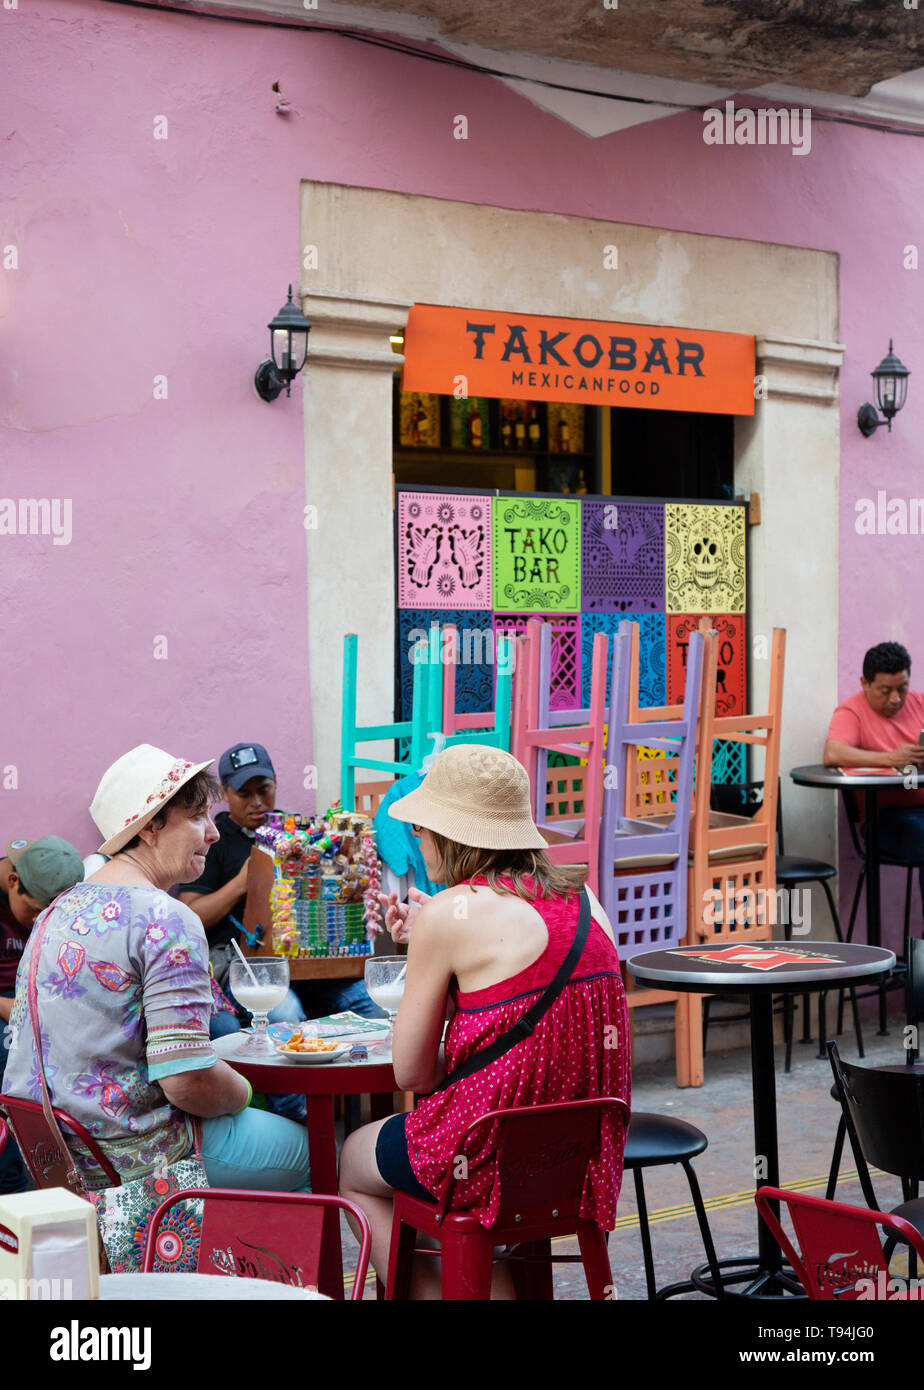 Latin America food - people eating at a taco bar cafe outside, Campeche old town UNESCO world heritage site, Campeche Mexico, Latin America Stock Photo